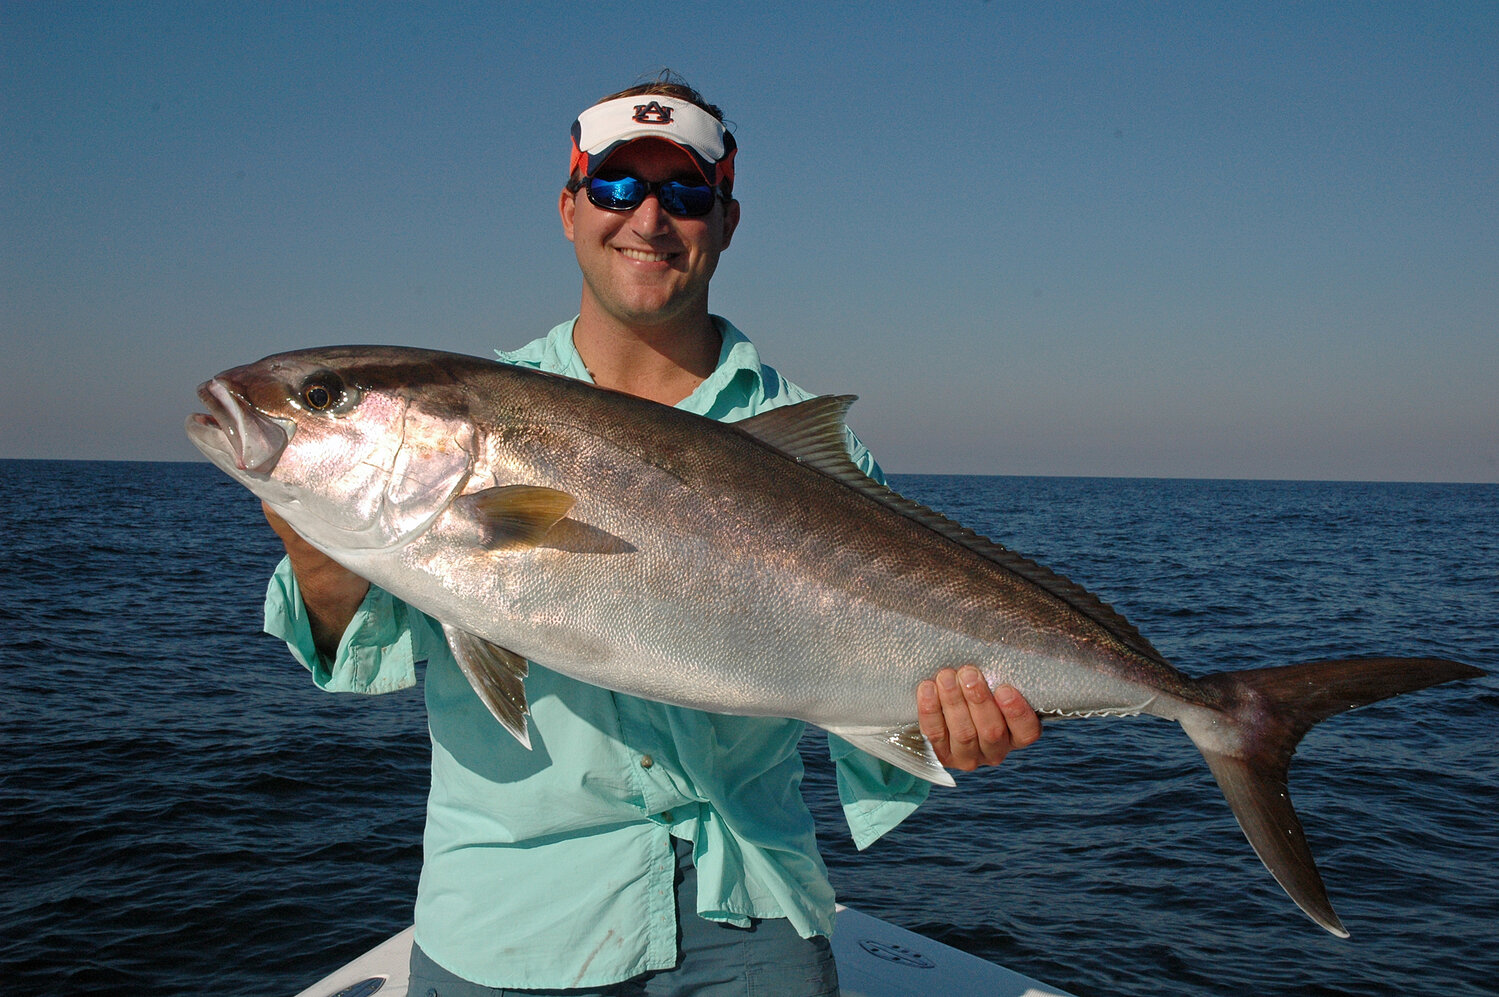 The greater amberjack season in the Gulf of Mexico opens on Aug. 1 and ends at midnight on Aug. 24.